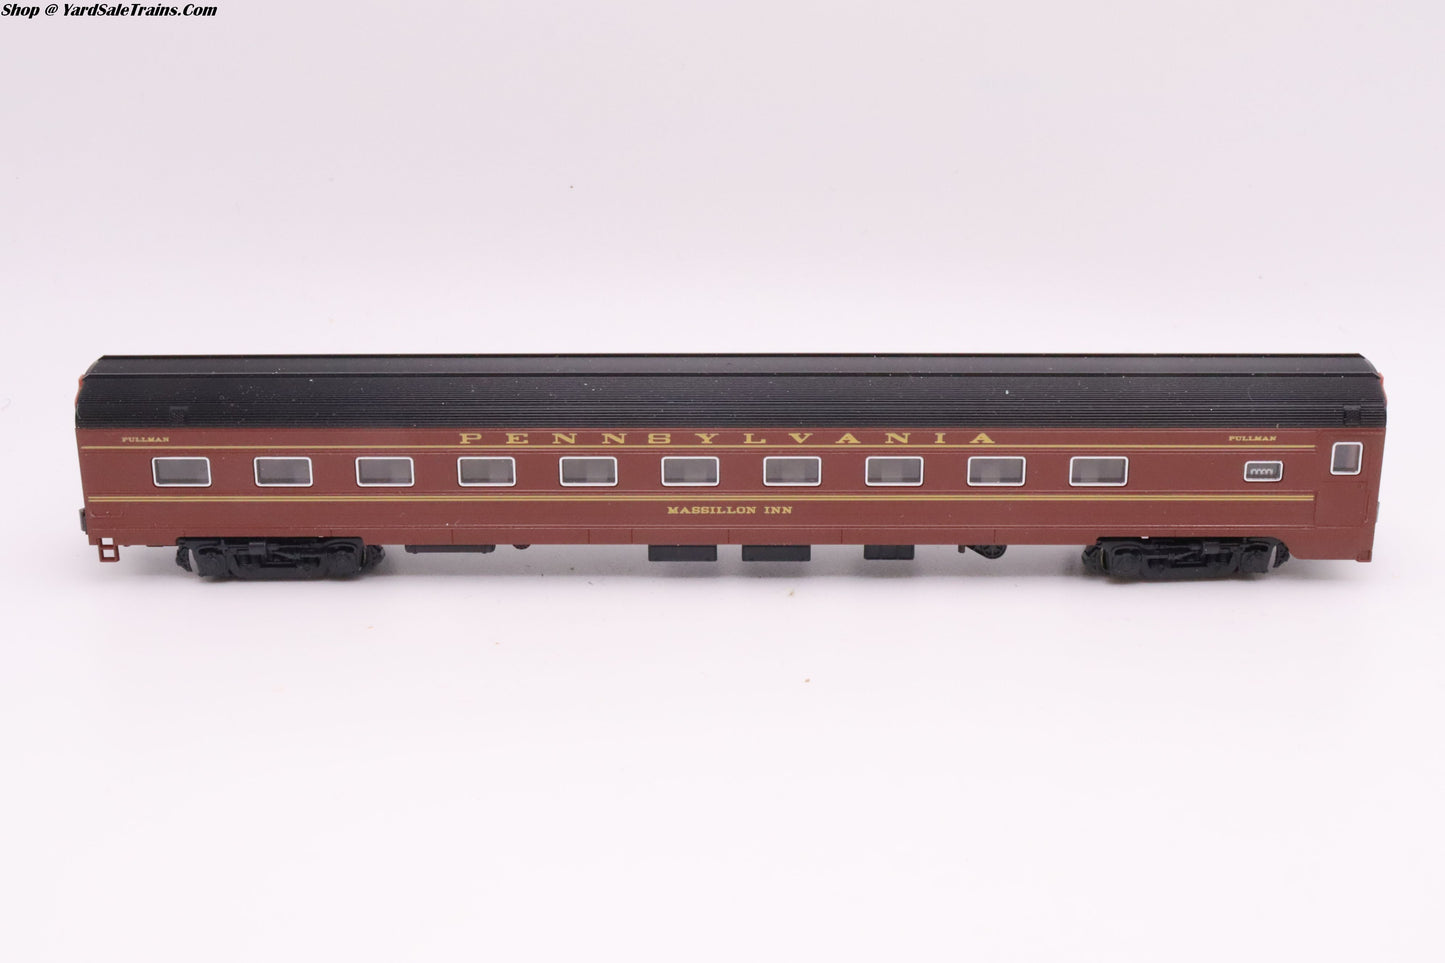 KAT-106-7111 - Smooth Side 4-Car Add-On Set - Pennsylvania - N Scale - Preowned